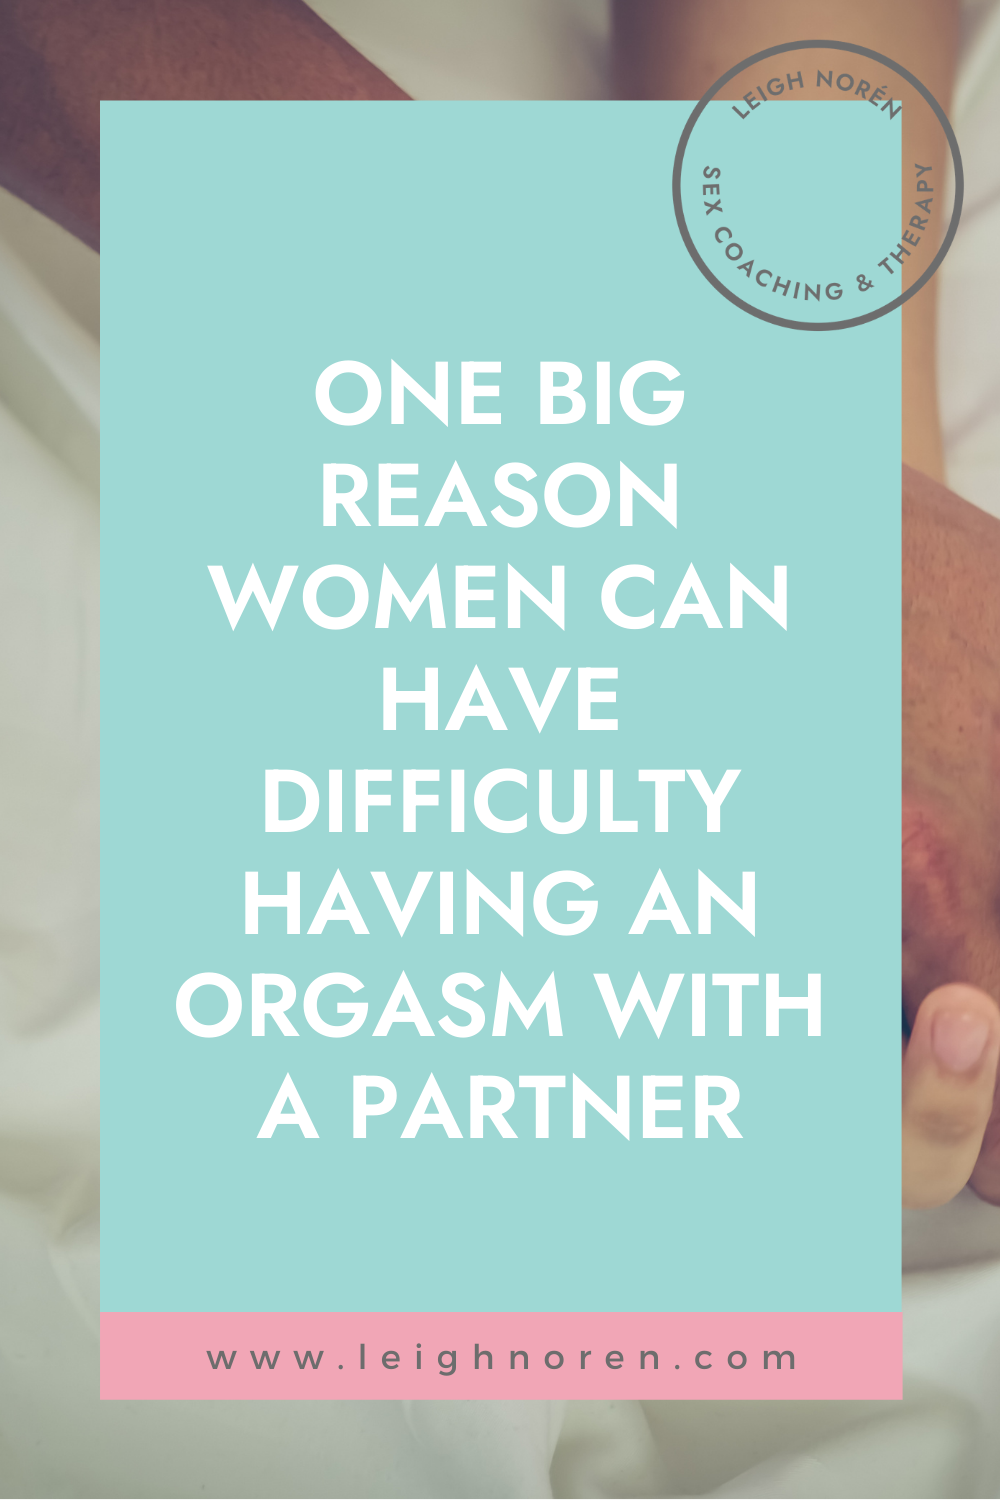 One Big Reason Women Can Have Difficulty Having An Orgasm With A Partner